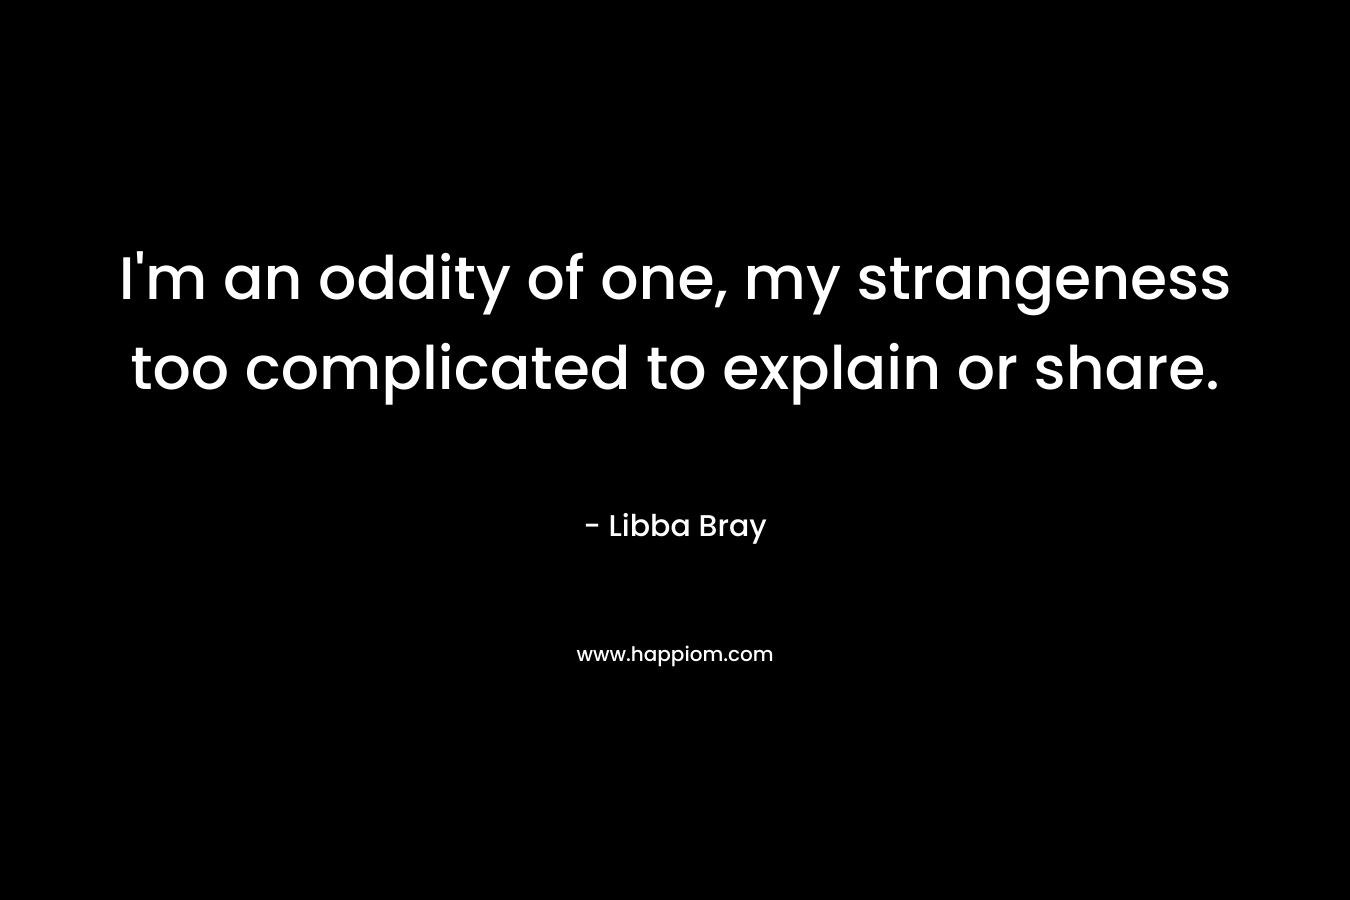 I'm an oddity of one, my strangeness too complicated to explain or share.